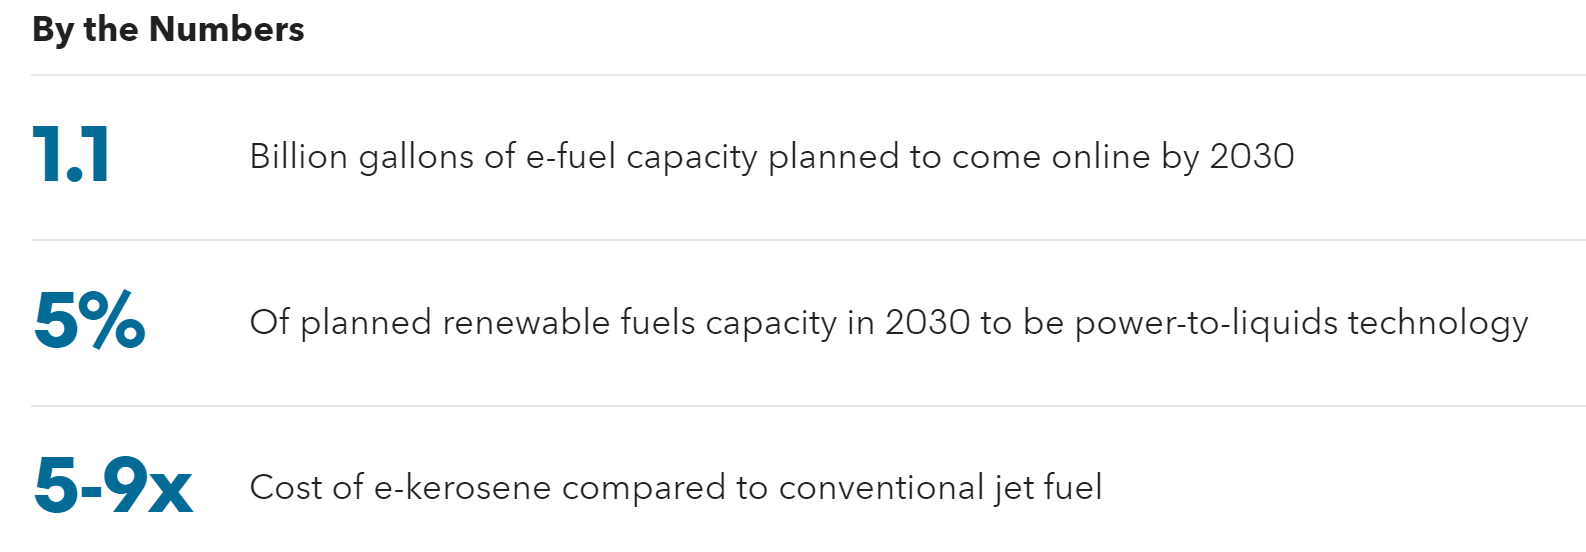 key e-fuel stats from 2024 to 2030